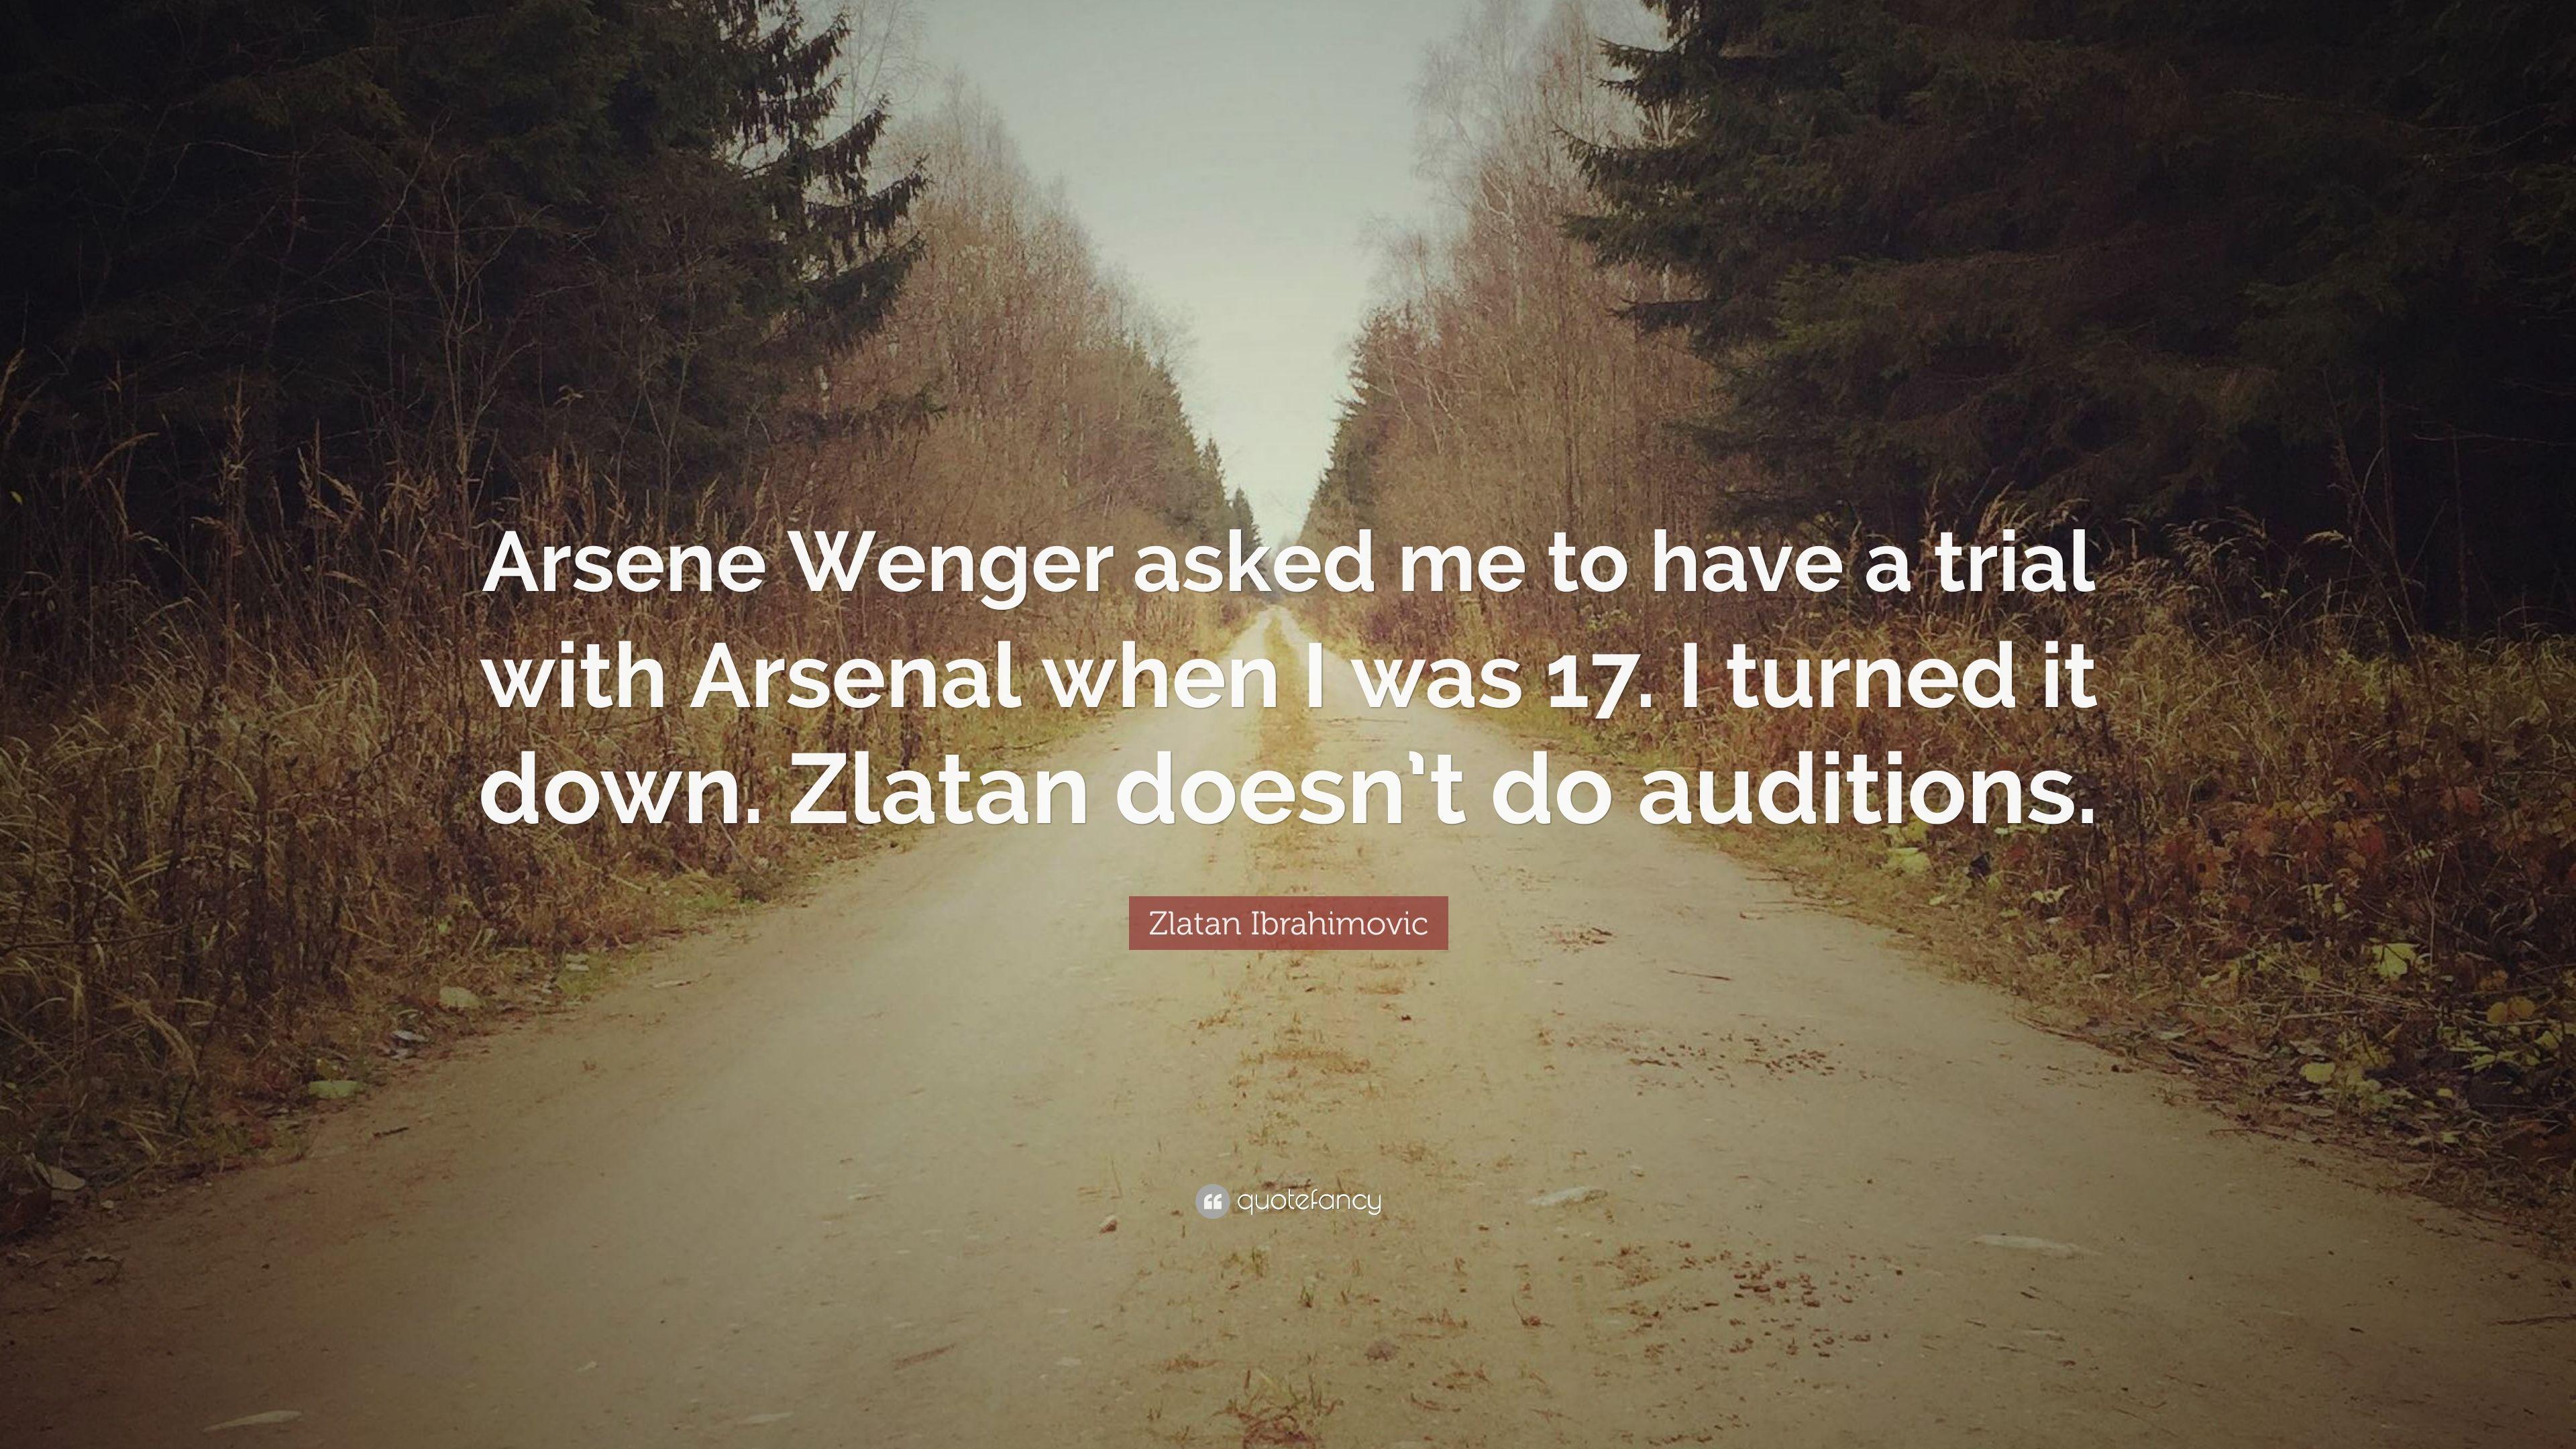 Zlatan Ibrahimovic Quote: “Arsene Wenger asked me to have a trial